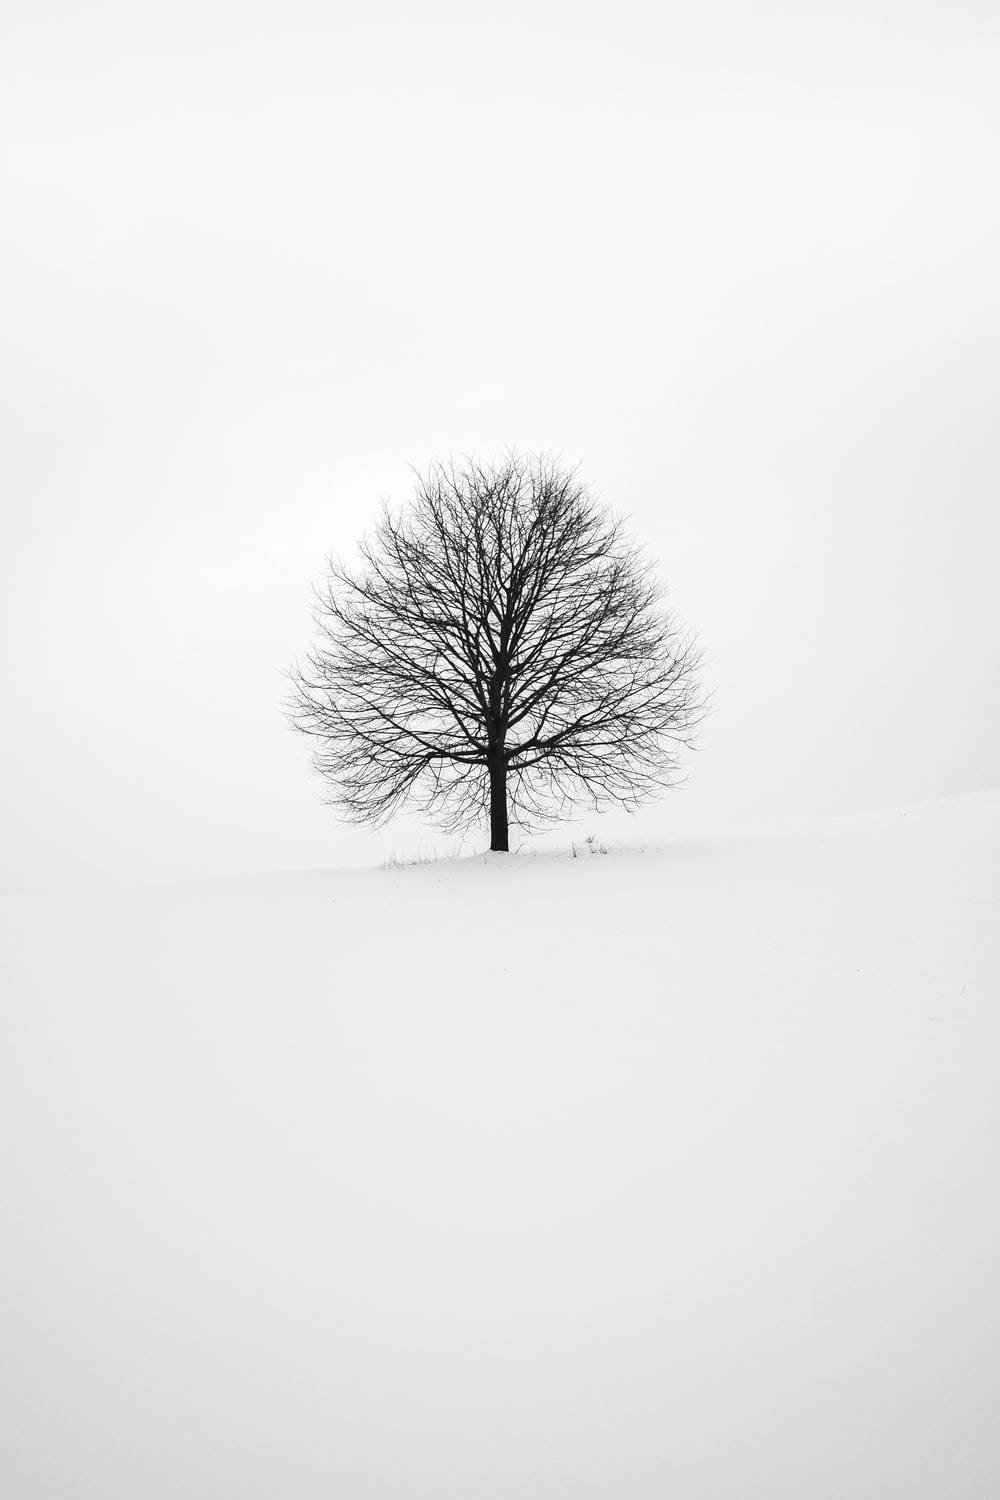 Cool Iphone White Lone Tree Wallpaper